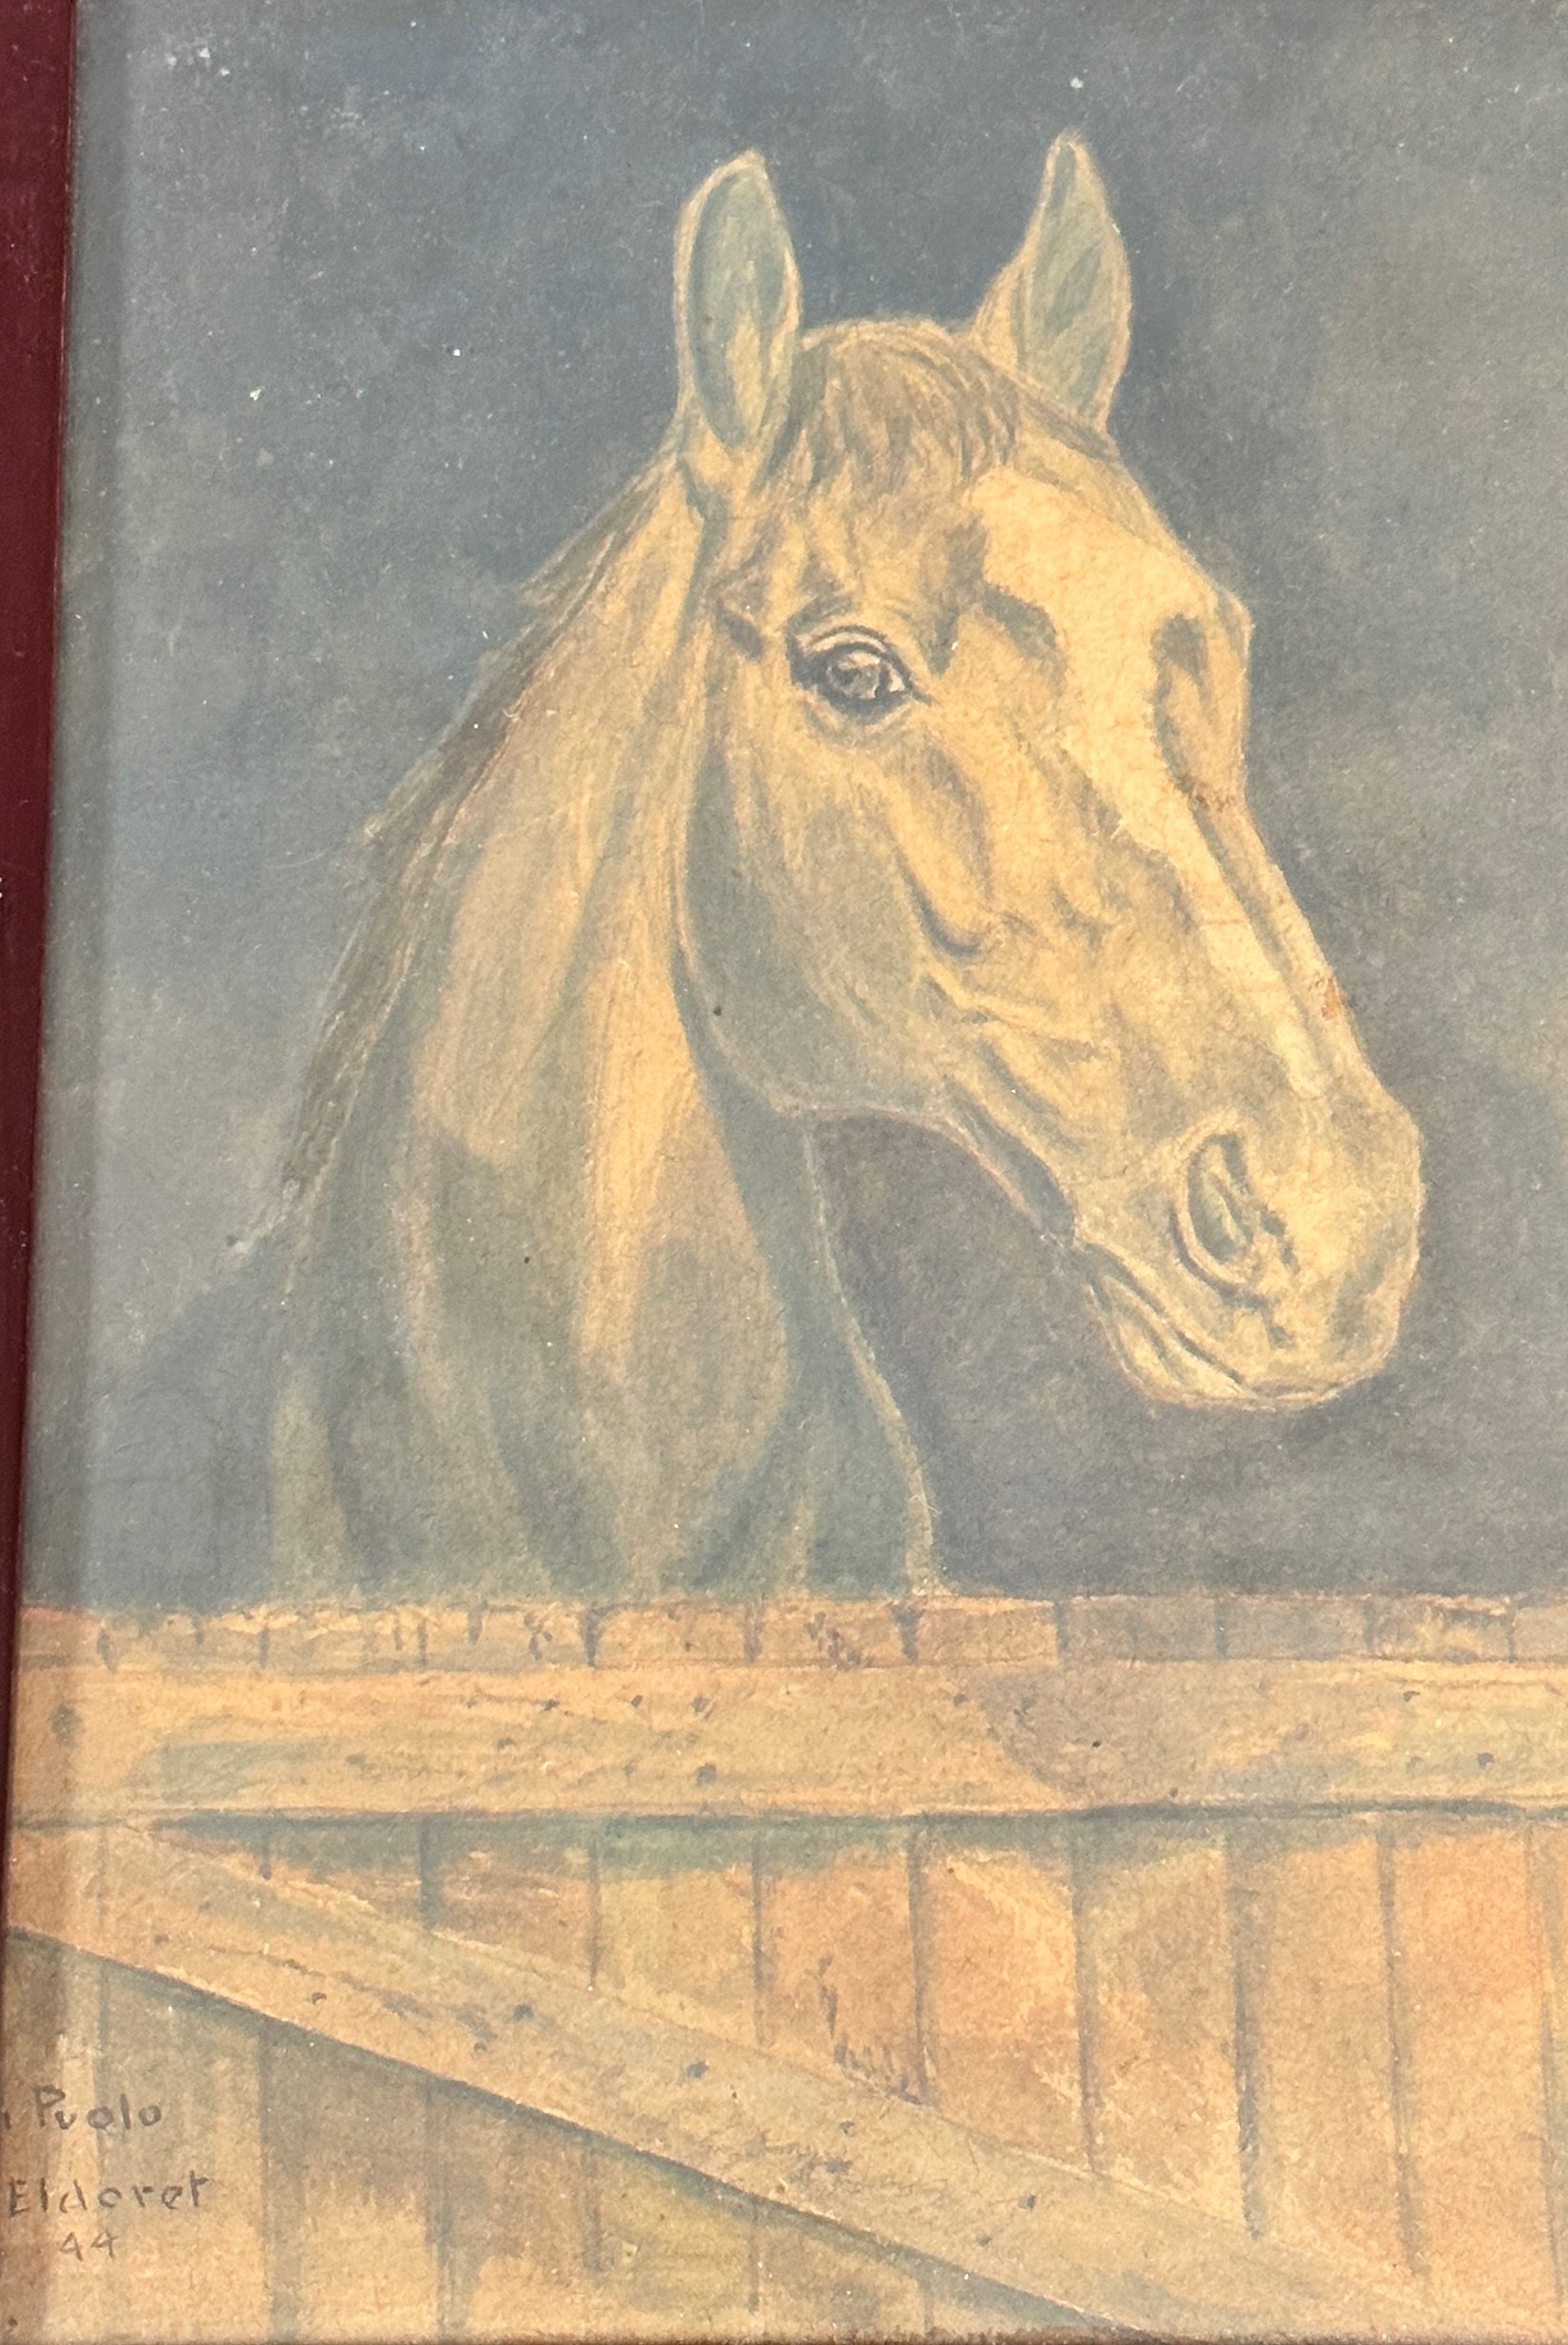 Pualo Eldoret, Horses Head over the Stable Door, print, signed bottom left, dated '44, mahogany